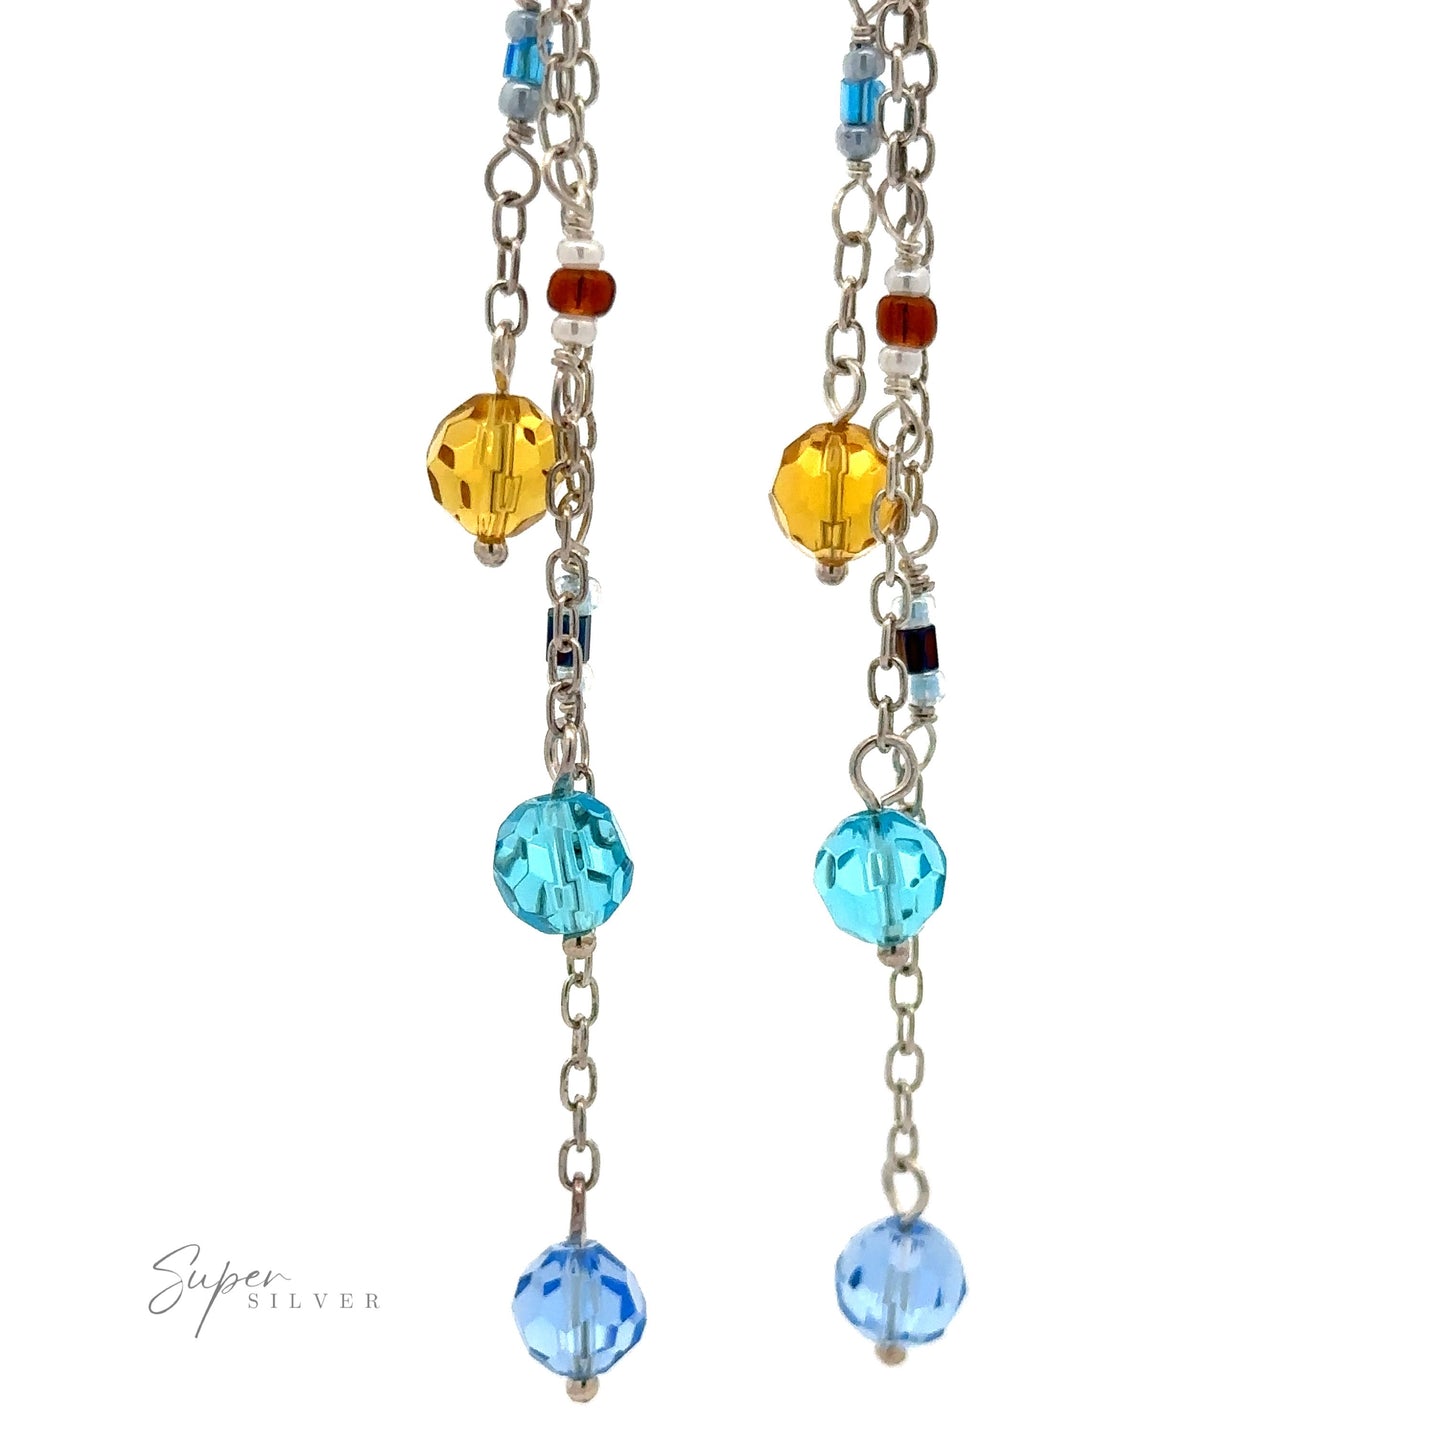 
                  
                    Dangle earrings with silver chains featuring multicolored beads in blue and yellow crystal. The brand name "Super Silver" is displayed in the bottom left corner.
                  
                